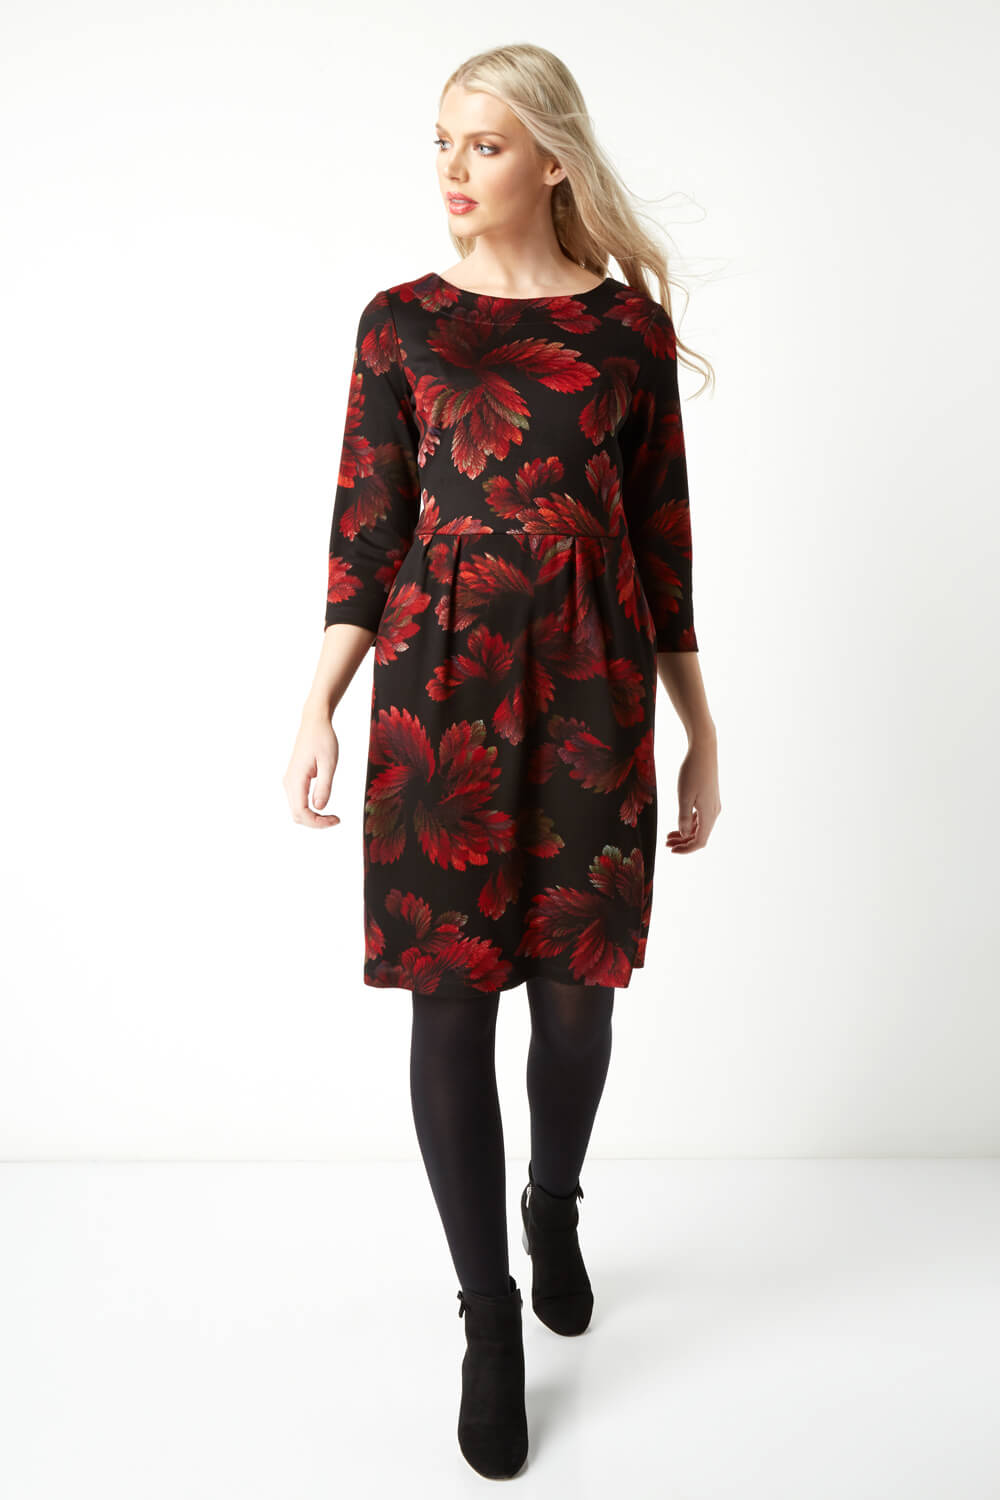 Red Floral Dress with Pockets, Image 2 of 5